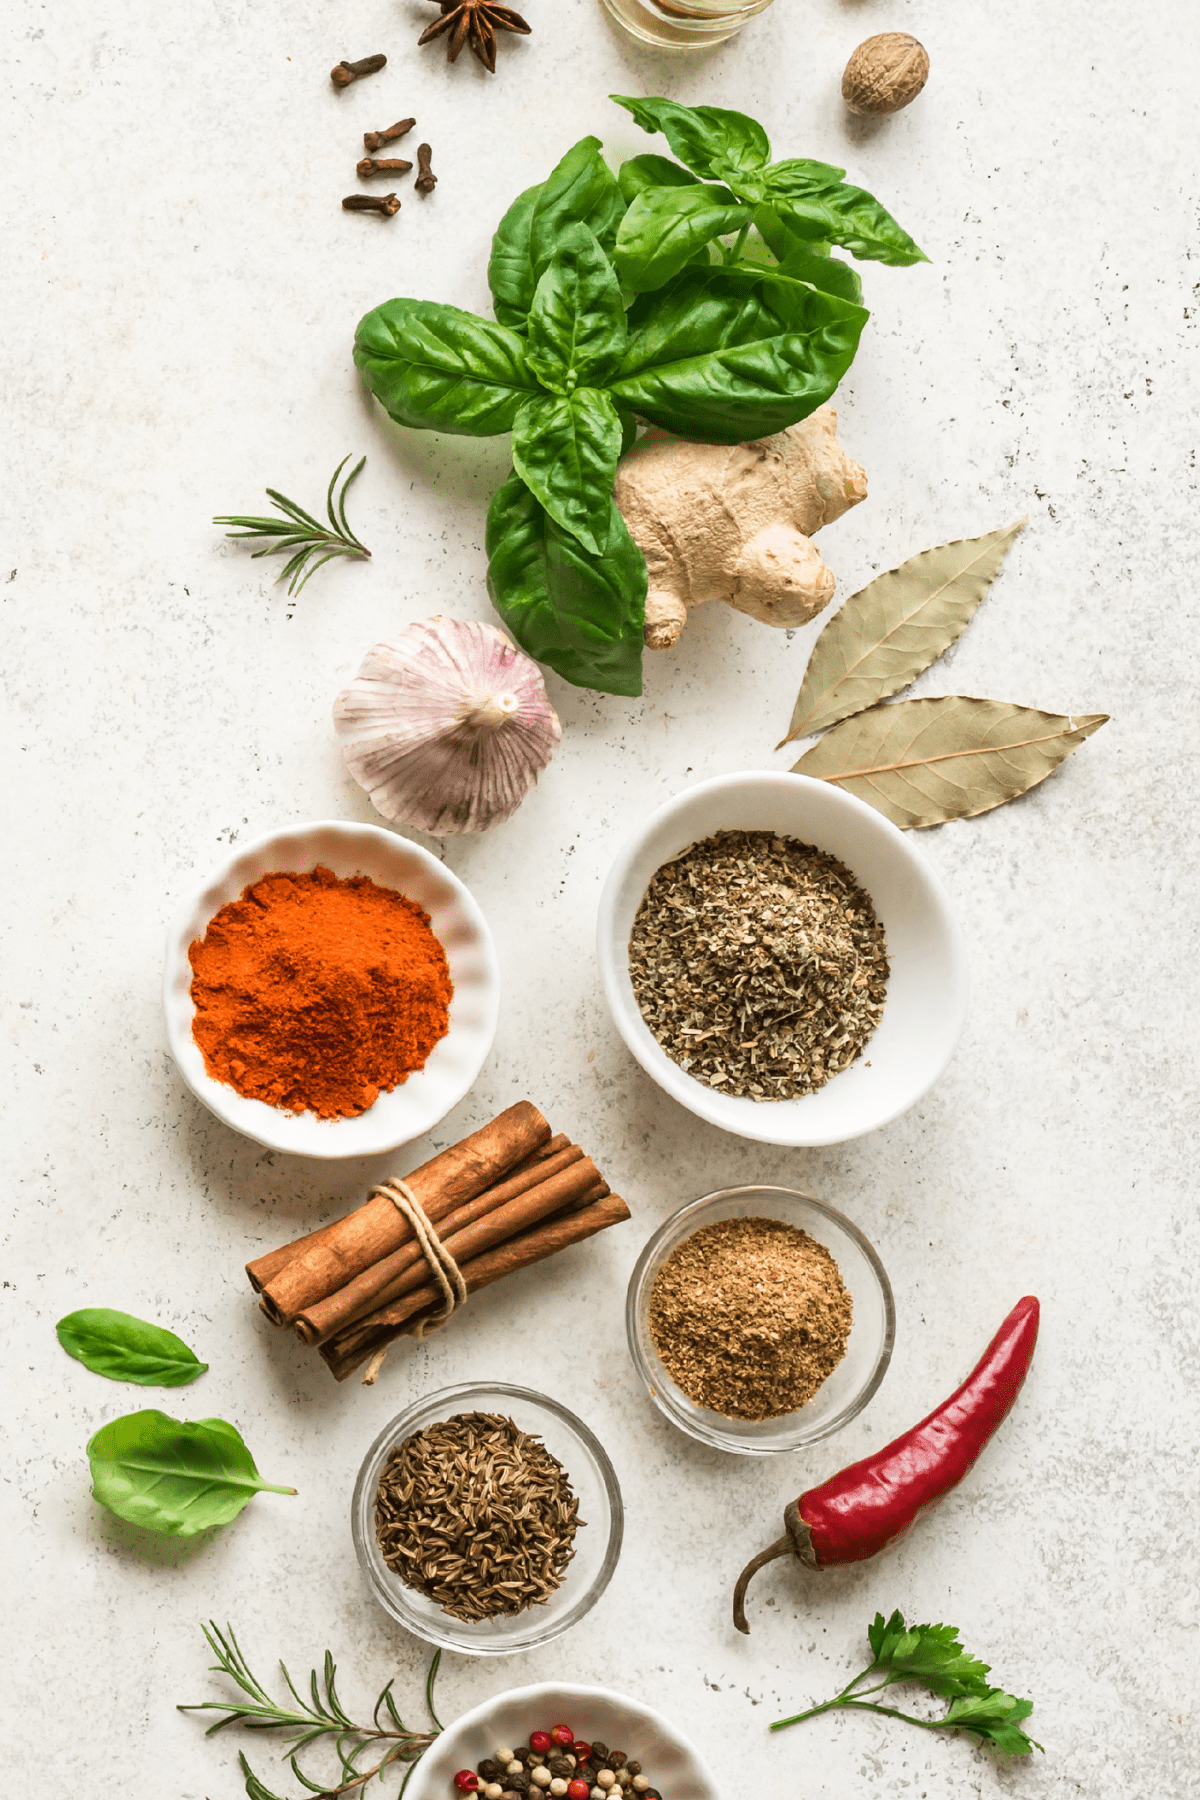 A picture of various herbs and spices.